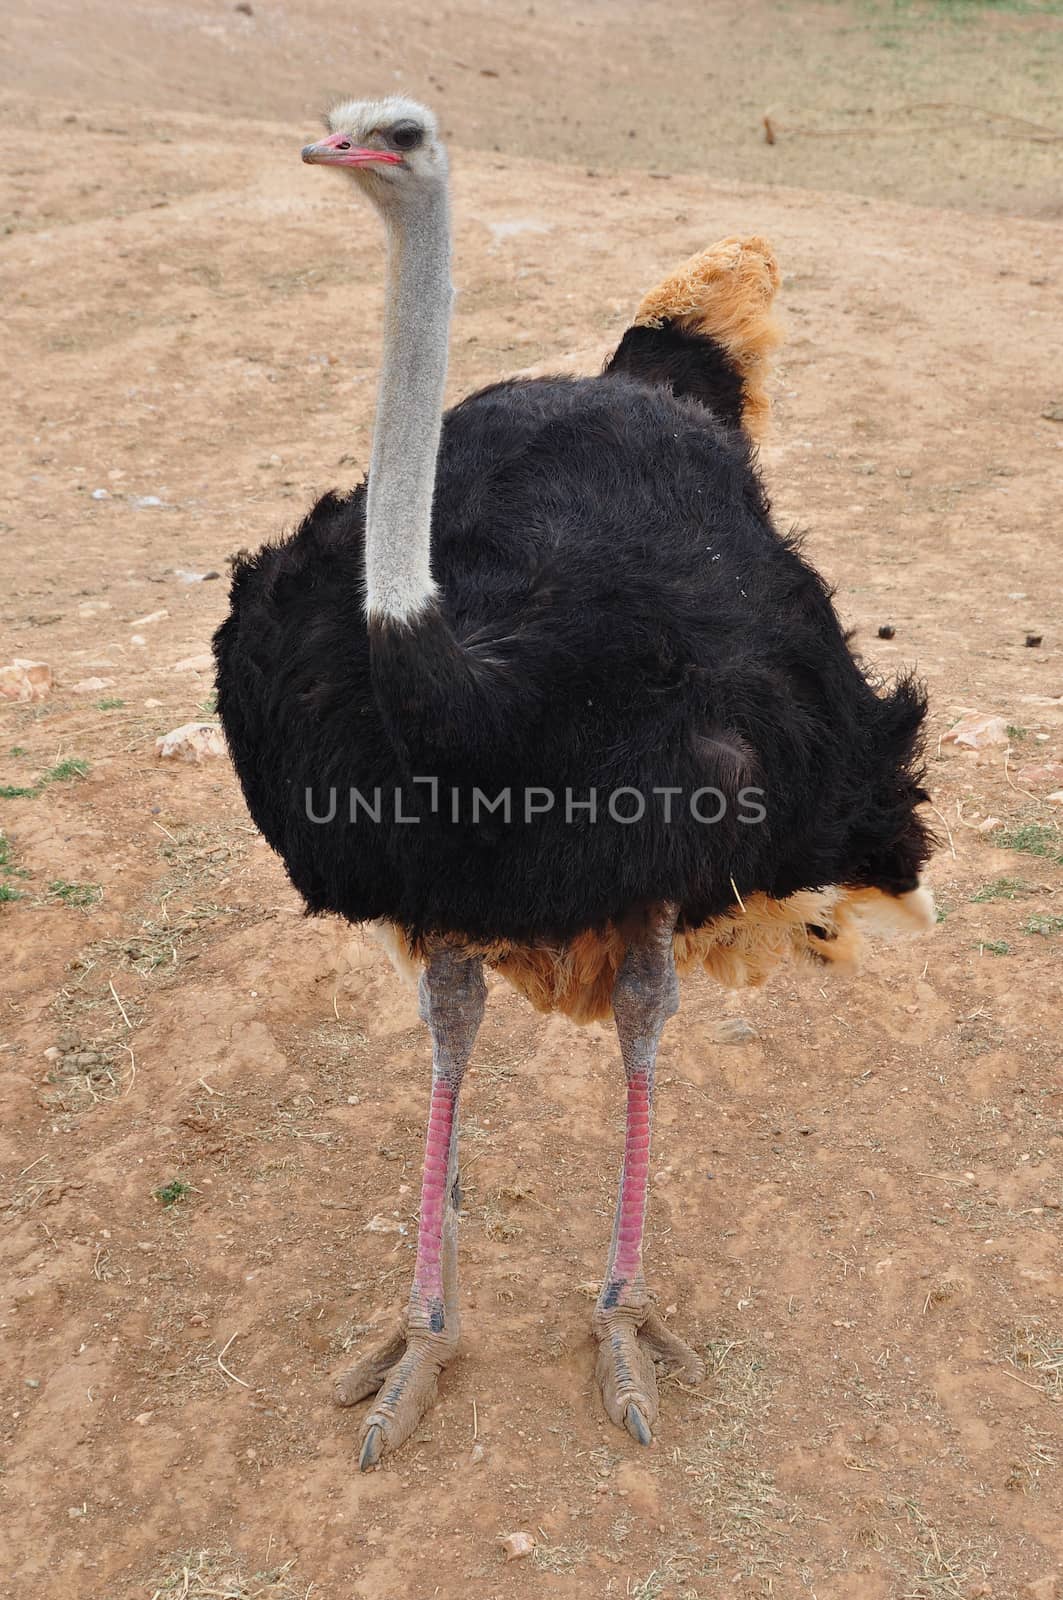 African wild ostrich large flightless bird with long neck and legs. Animal background.